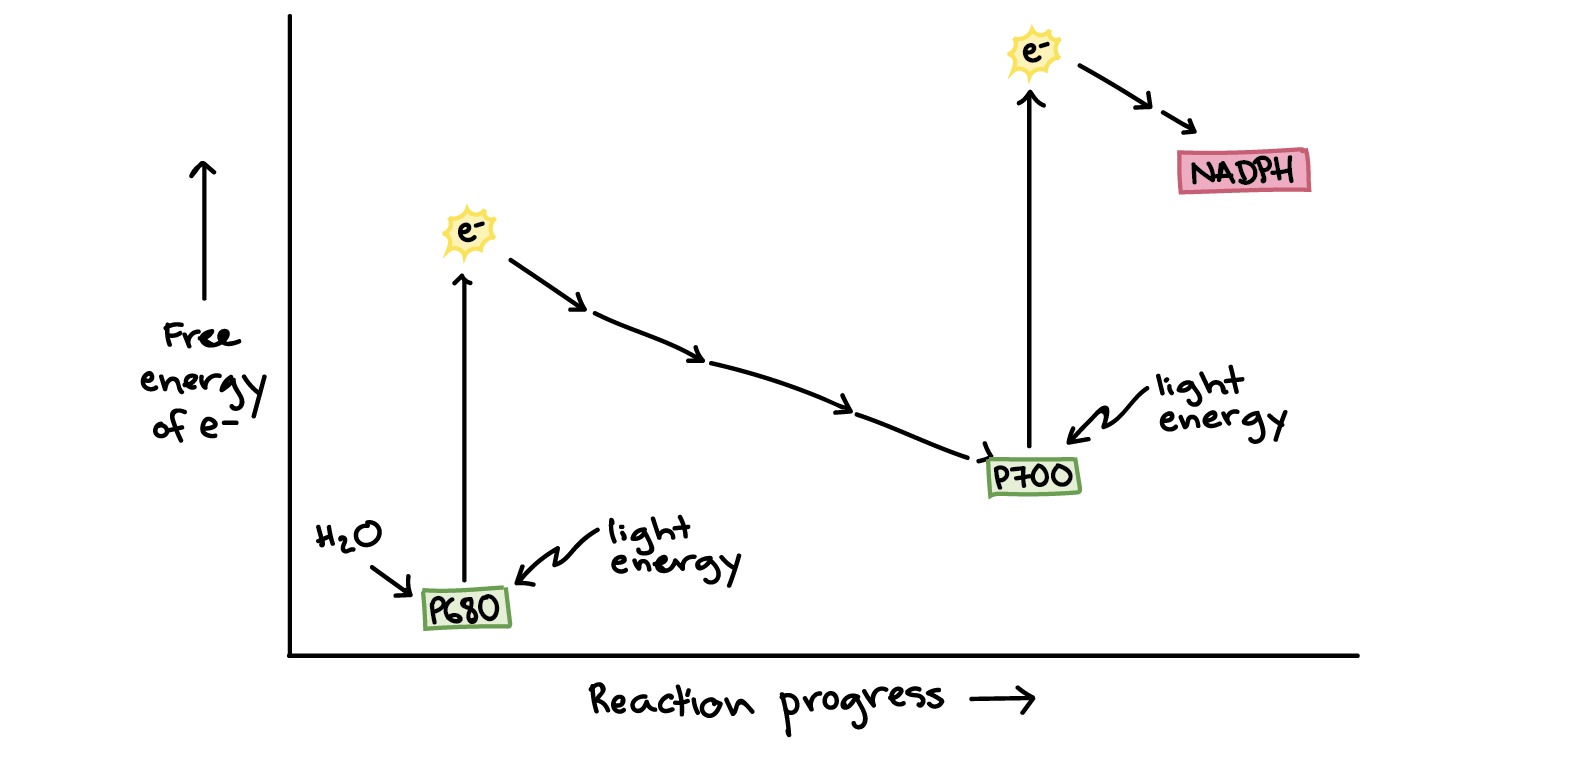 light reactions of photosynthesis